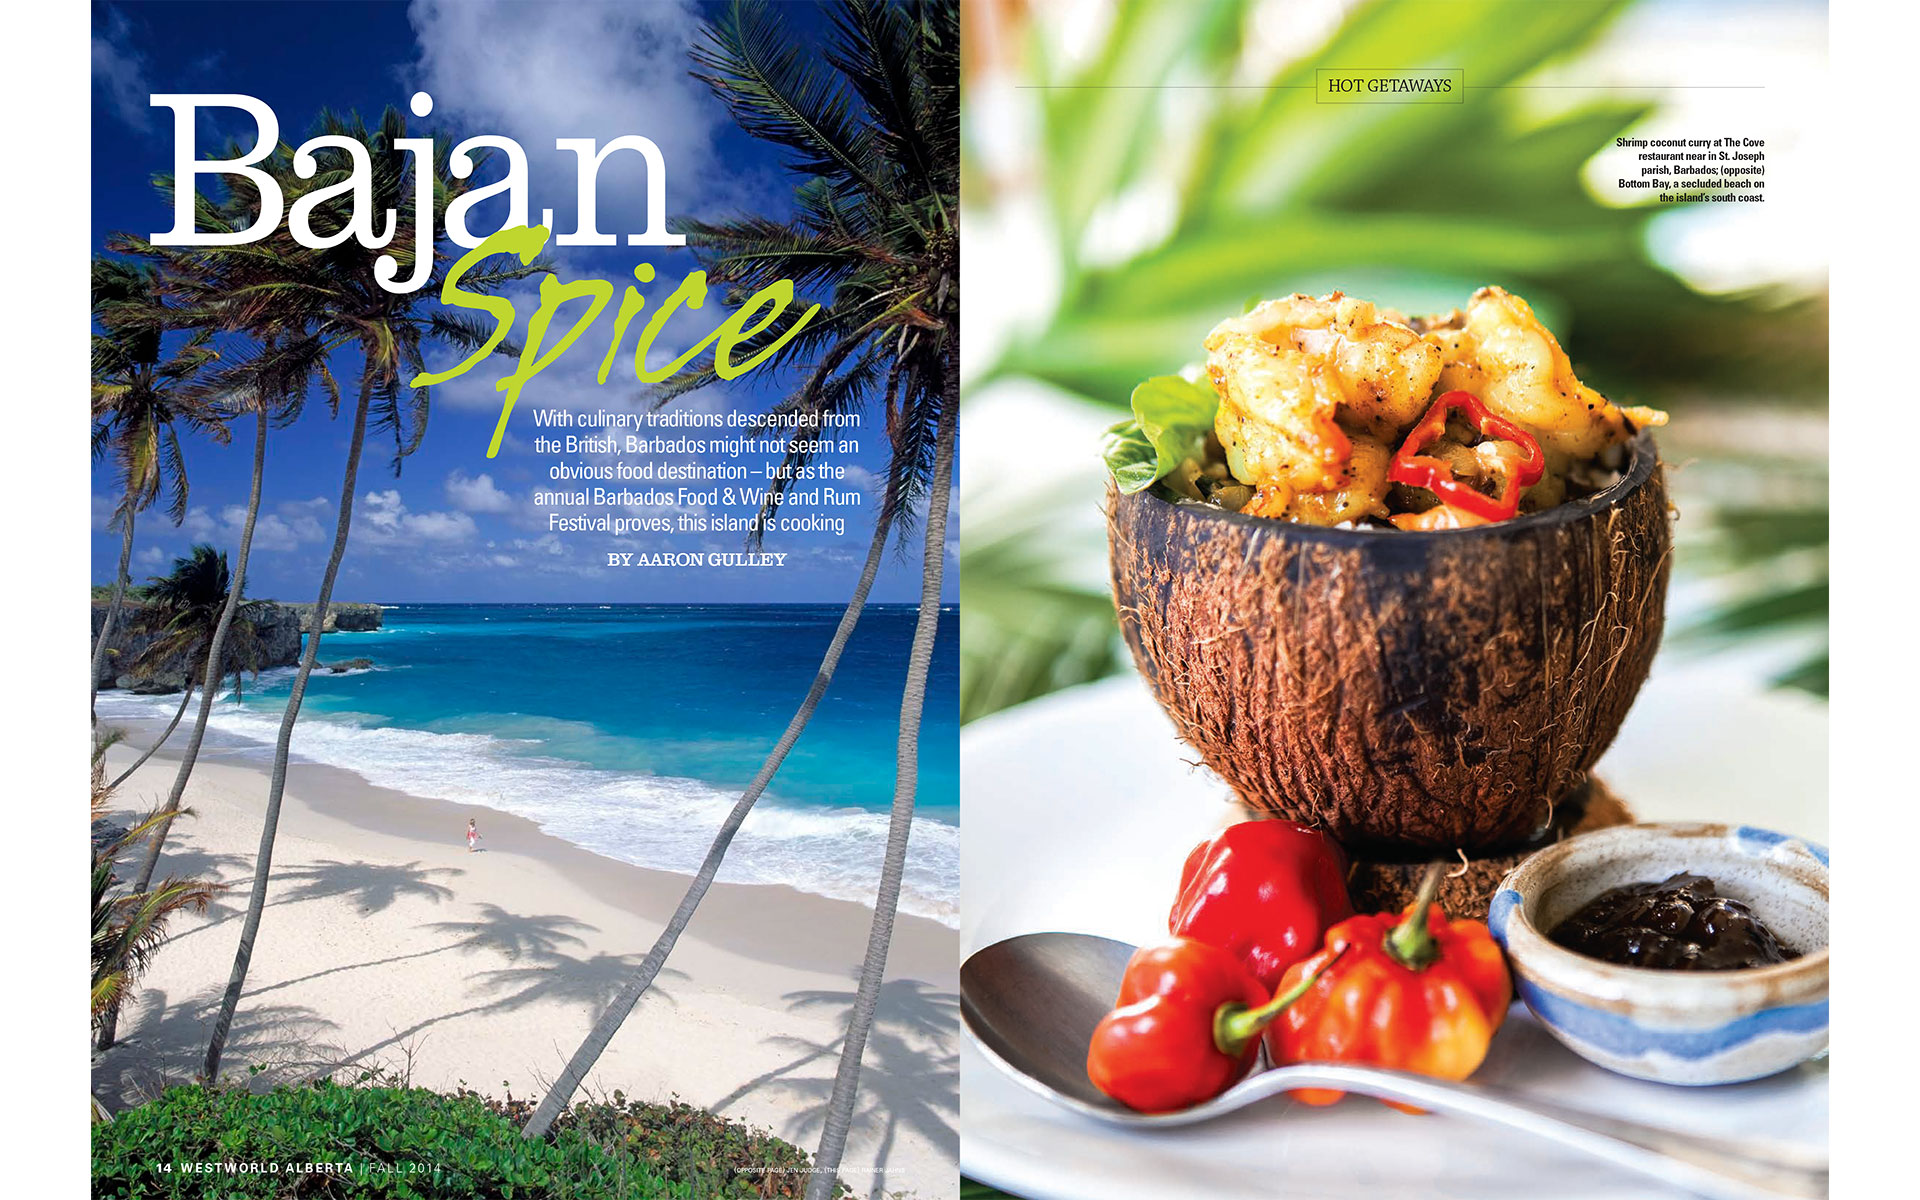 <p style="text-align: center;"><b><font color="2a2871">Bajan Spice, Westworld, Fall 2014</font></b>
</p>
With culinary traditions descended from the British, Barbados might not seem an obvious food destination--but as the Barbados Food & Wine and Rum Festival proves, this island is cooking.
<p style="text-align: center;"><a href="/users/AaronGulley18670/WW_Barbados_Fall15.pdf" onclick="window.open(this.href, '', 'resizable=no,status=no,location=no,toolbar=no,menubar=no,fullscreen=no,scrollbars=no,dependent=no,width=900'); return false;">Read the Story</a></p>
